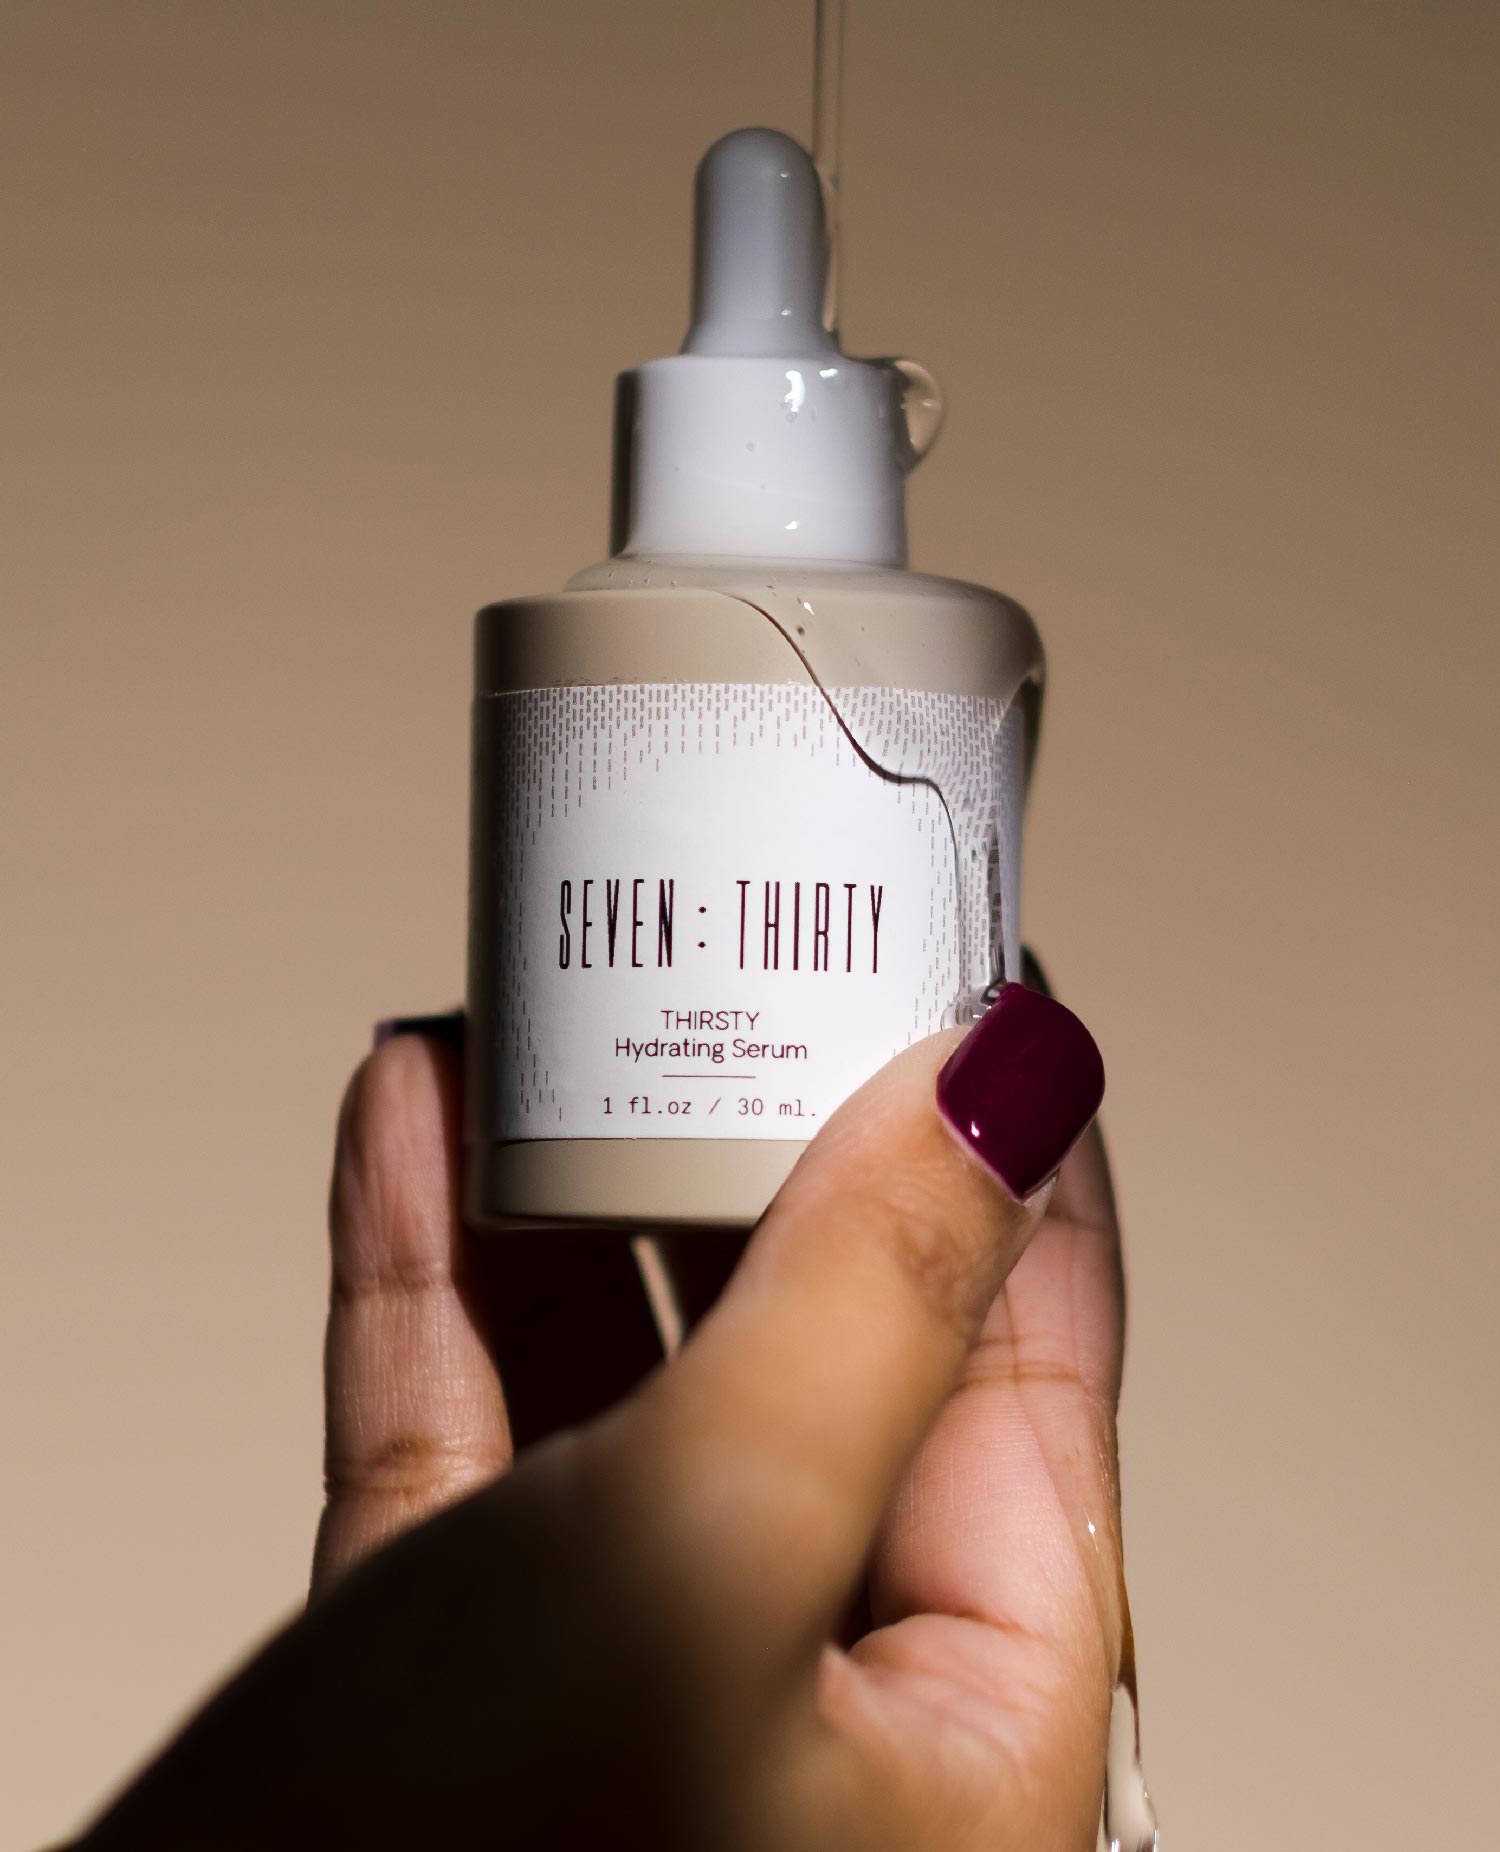 A hand with dark red nails holding THIRSTY Hydrating Serum against a khaki background with liquid product dripping onto the bottle and fingers.